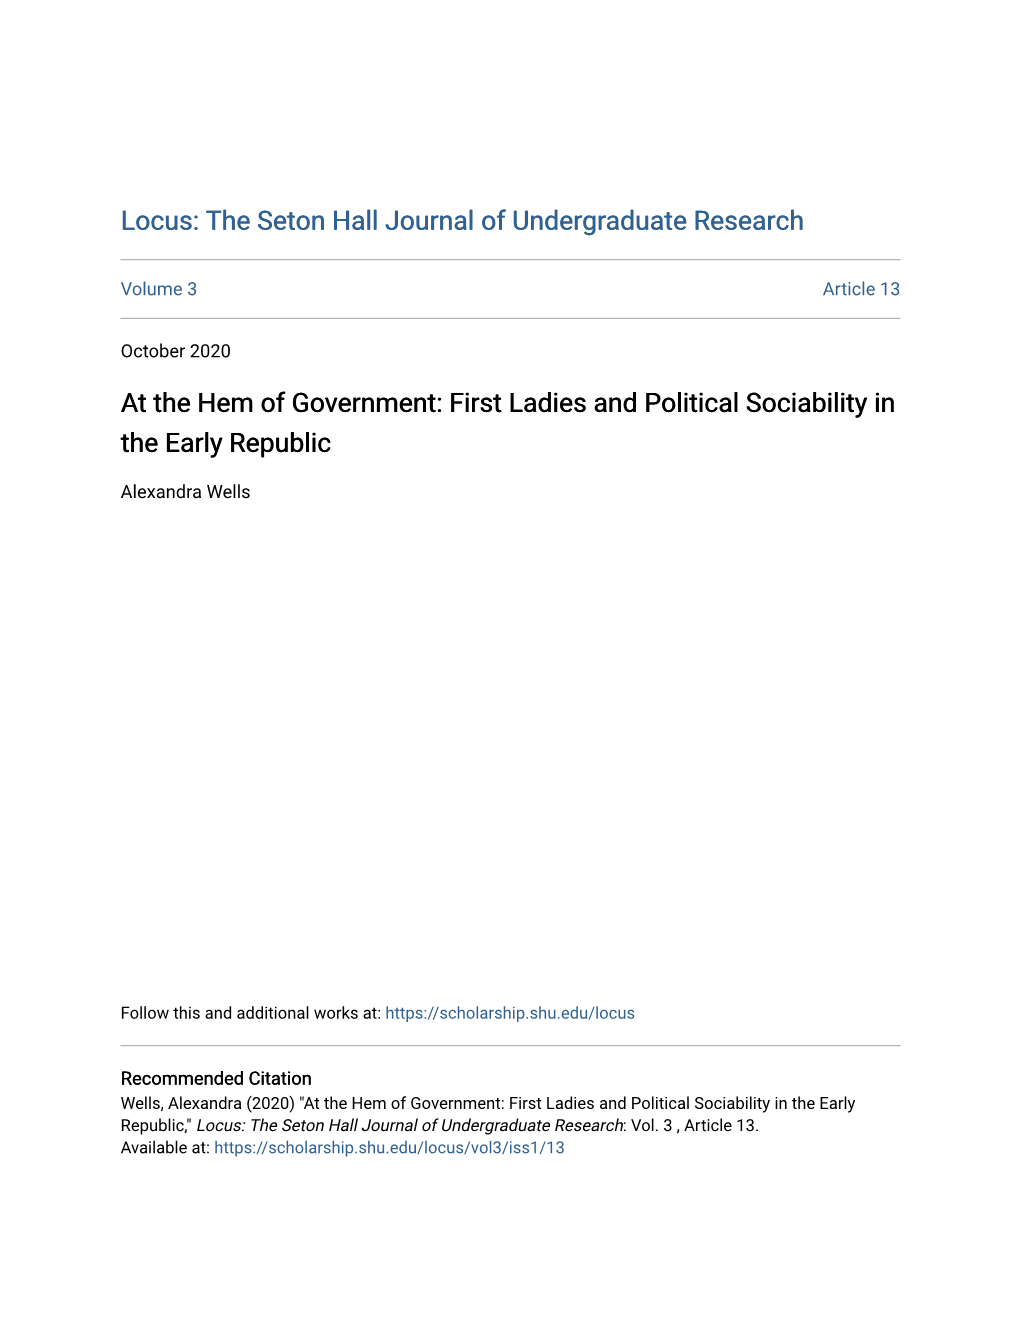 At the Hem of Government: First Ladies and Political Sociability in the Early Republic